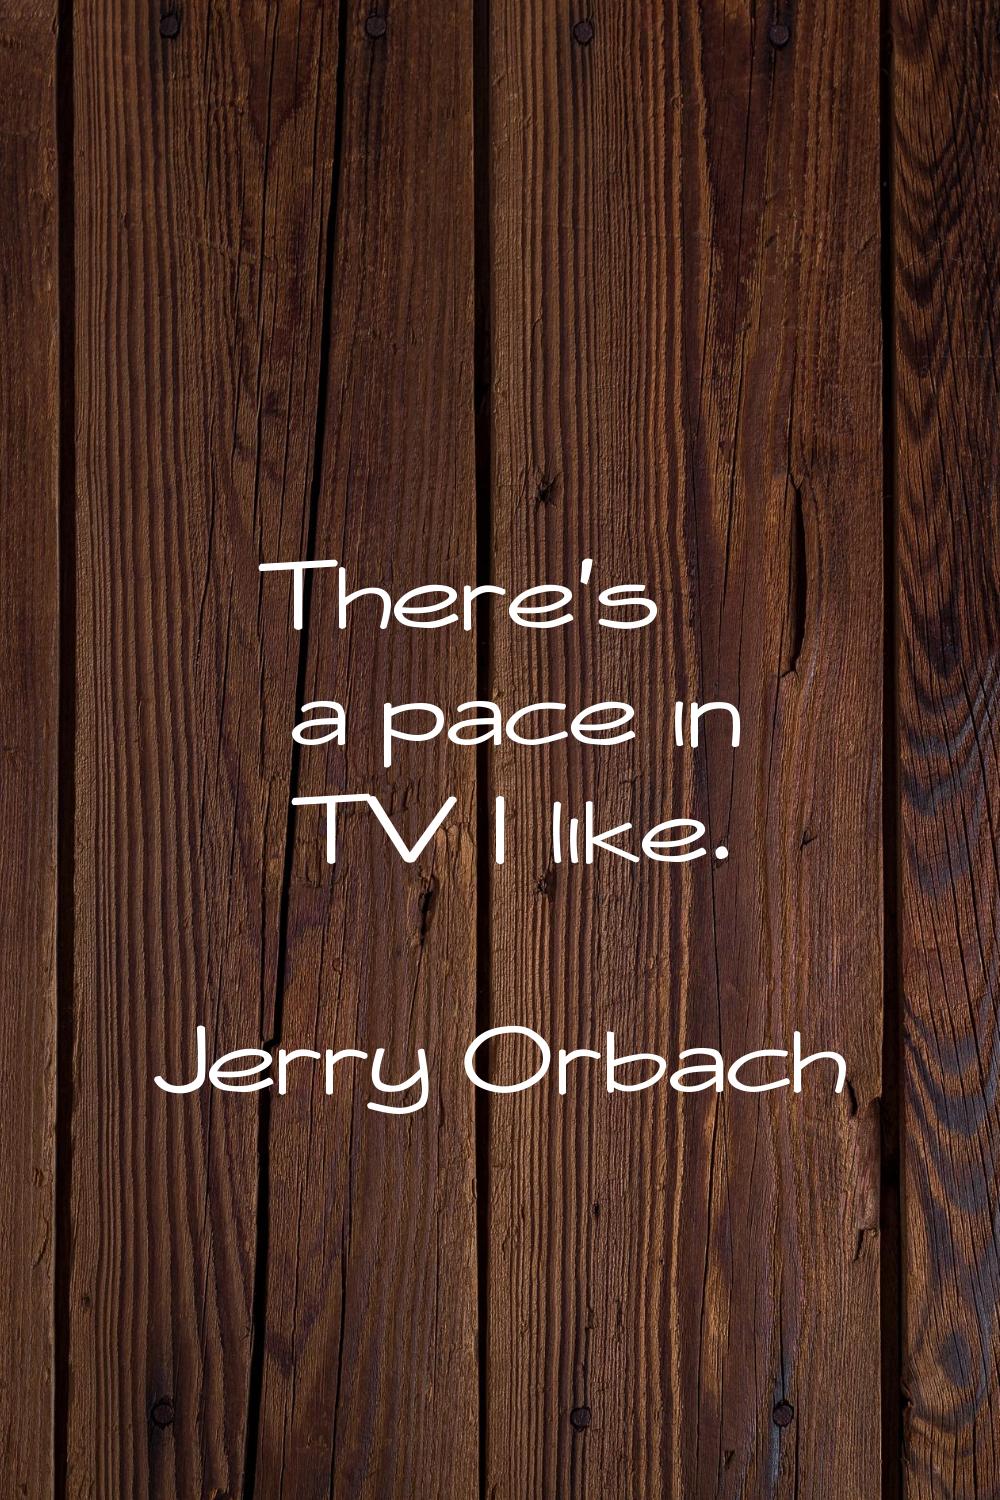 There's a pace in TV I like.